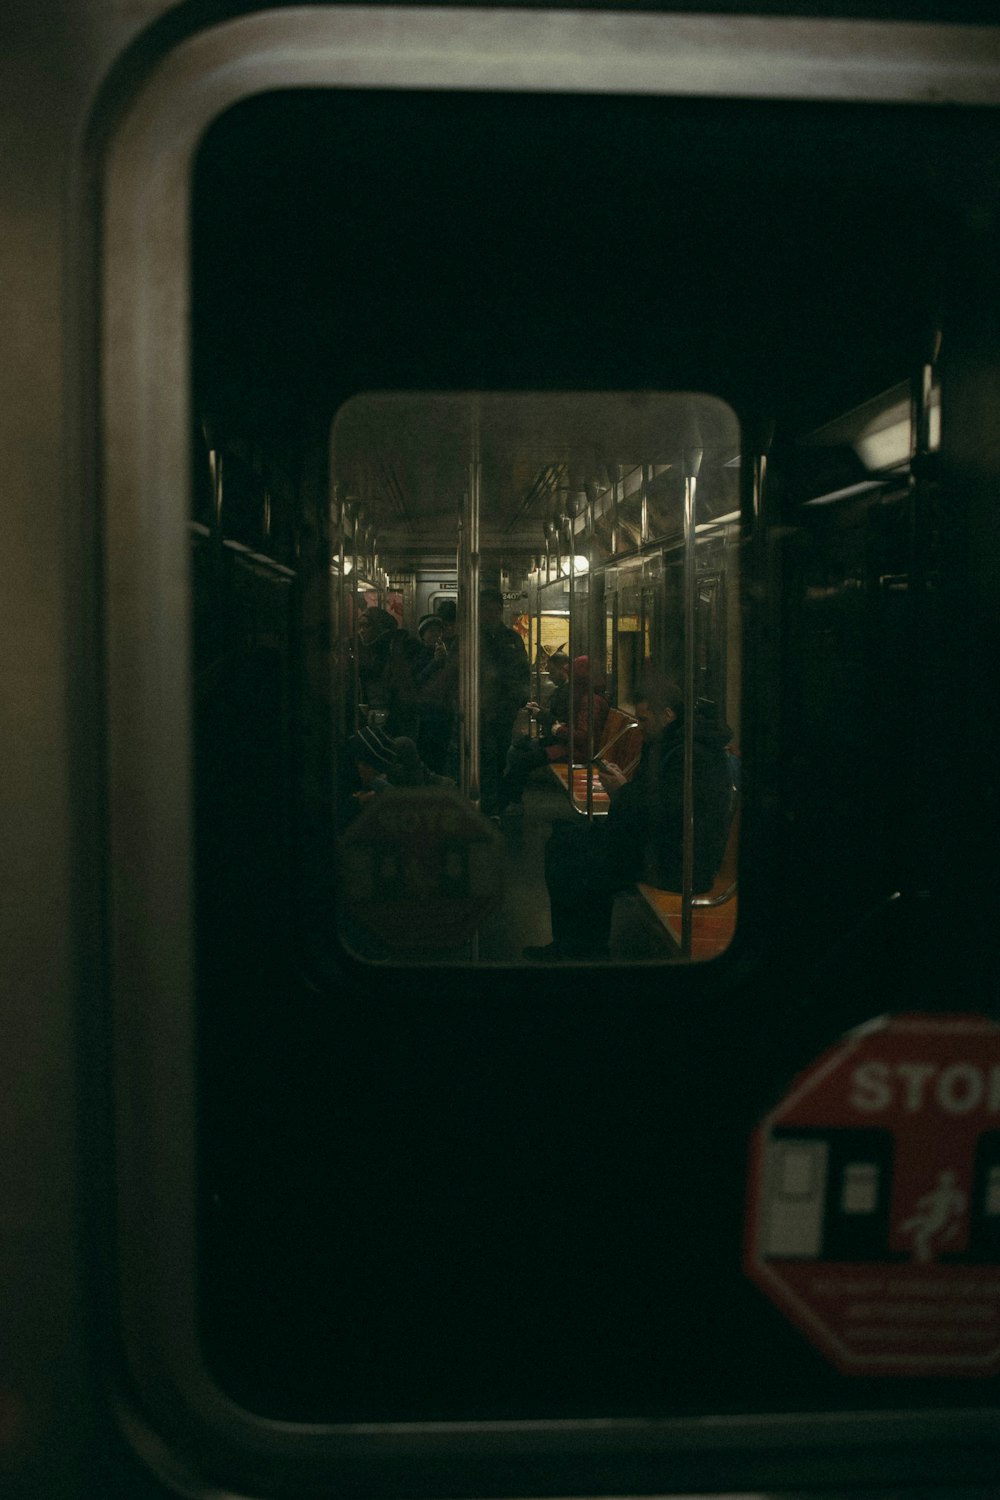 a view of the inside of a subway car